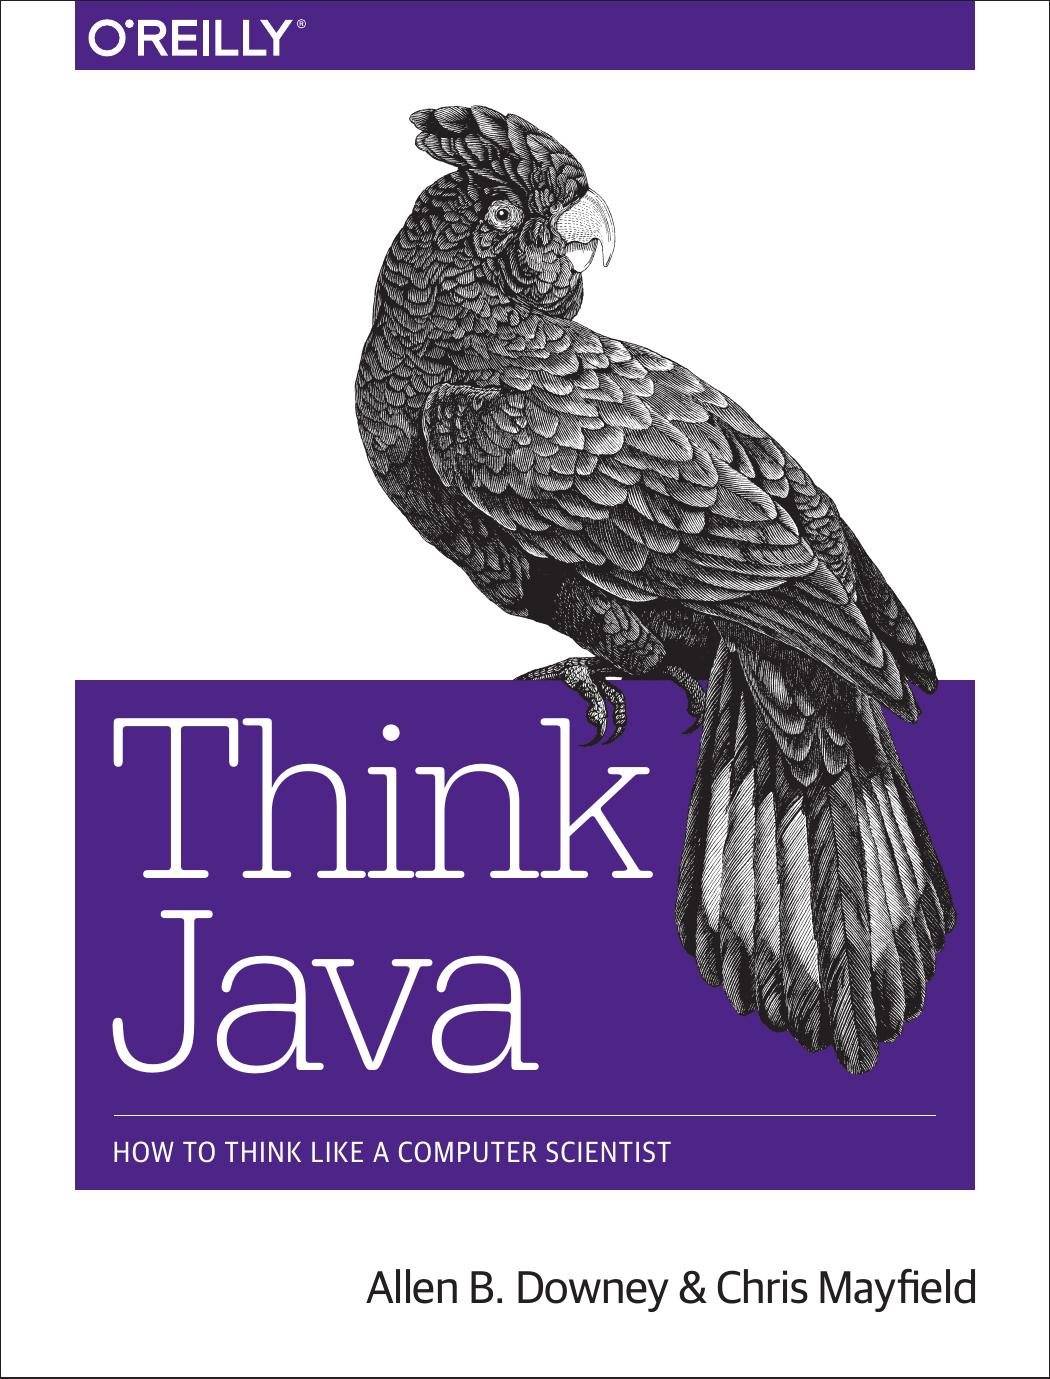 Think Java by Allen B. Downey and Chris Mayfield